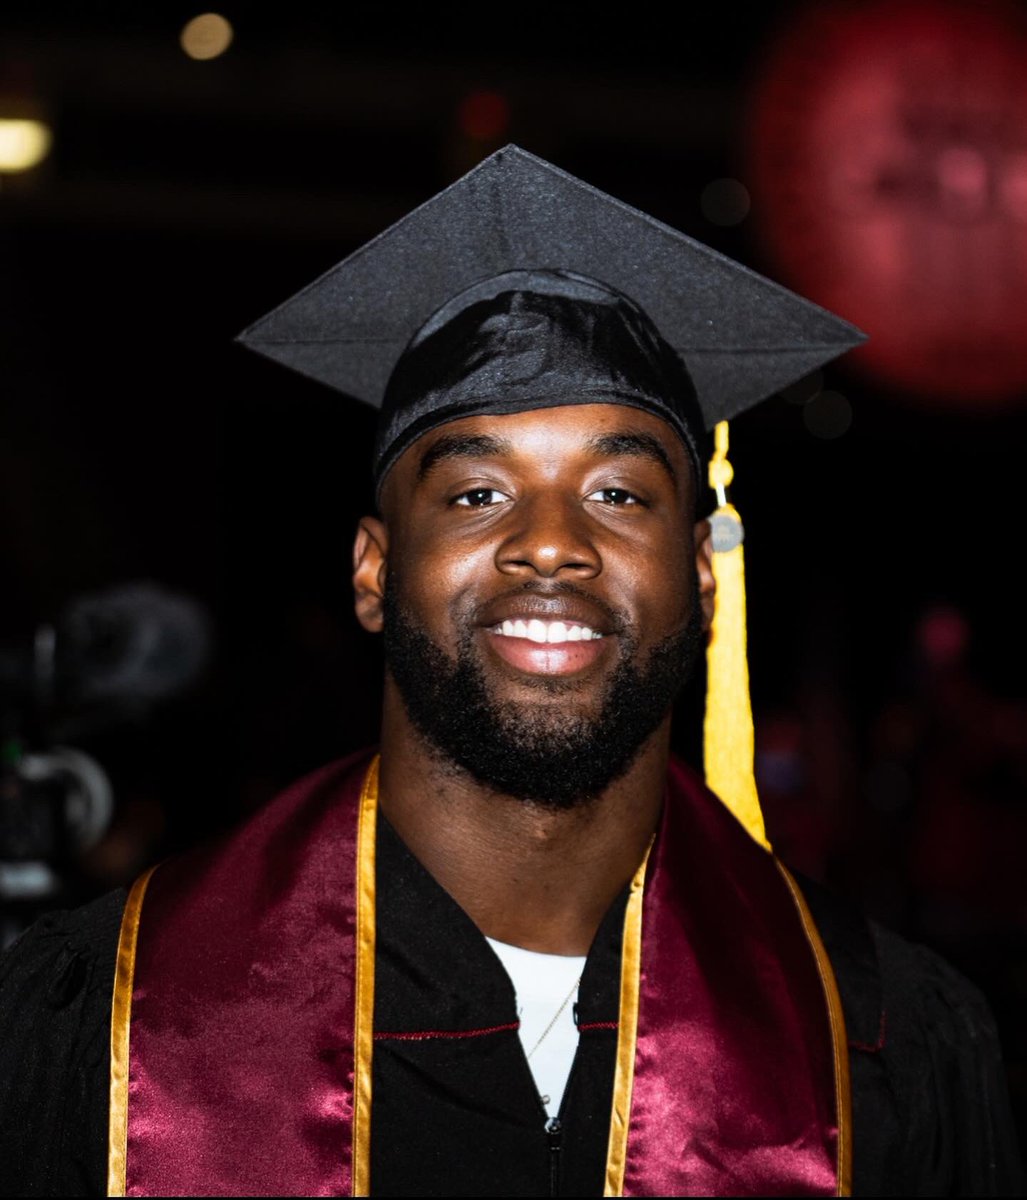 Added another accomplishment 🎓 Congrats to Trey on graduating from Florida State University!